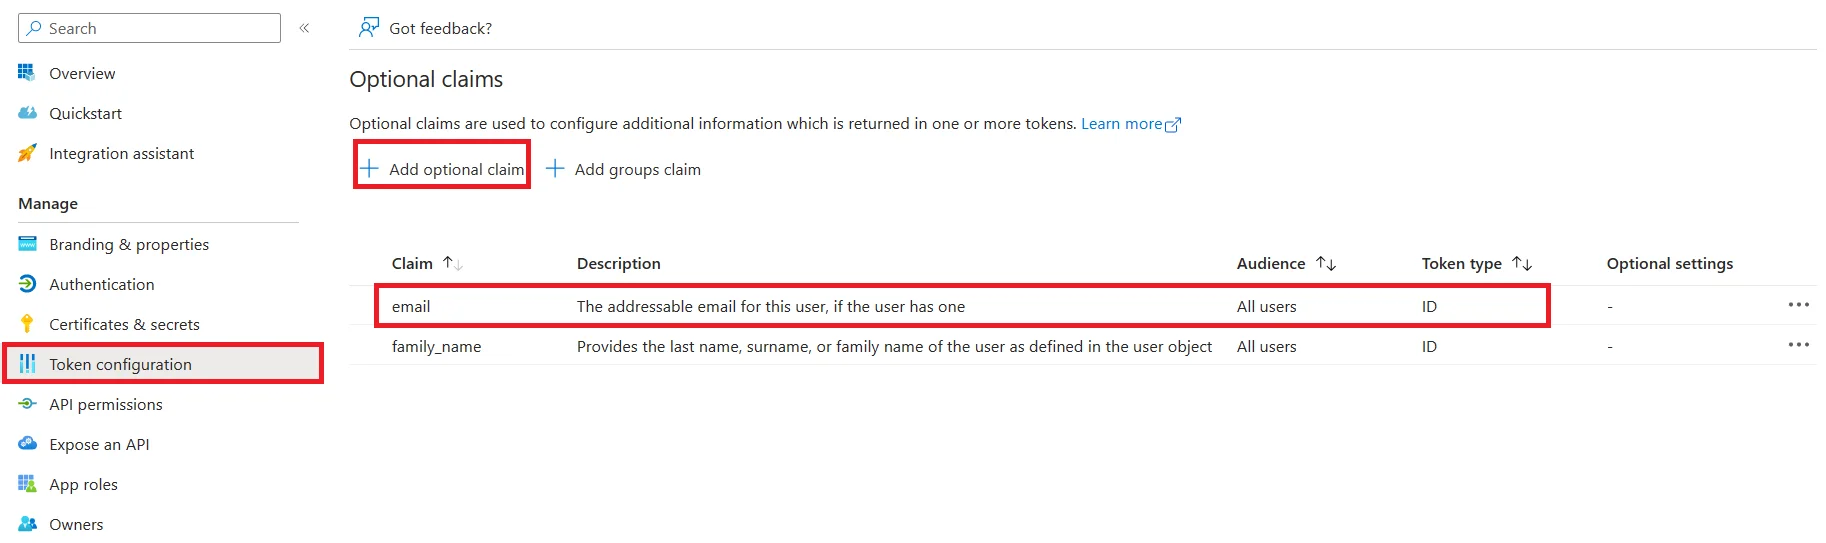 OAuth Single Sign-On Azure AD email attribute